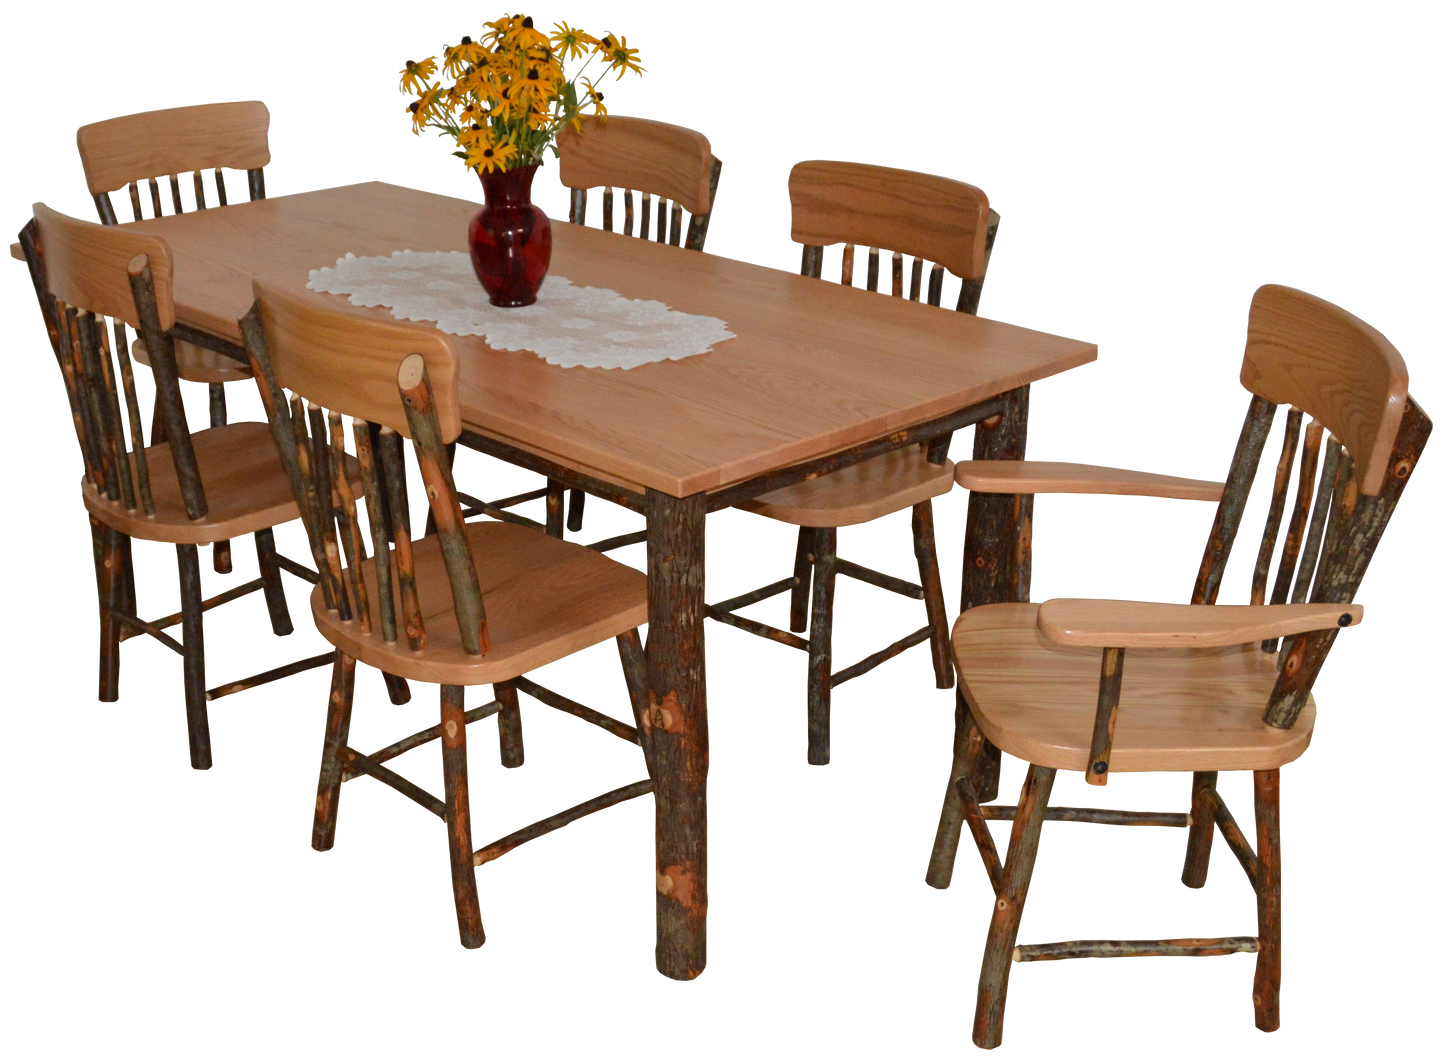 A&L Furniture Co. Amish Hickory Panel Back Dining Chair With Arms - LEAD TIME TO SHIP 4 WEEKS OR LESS